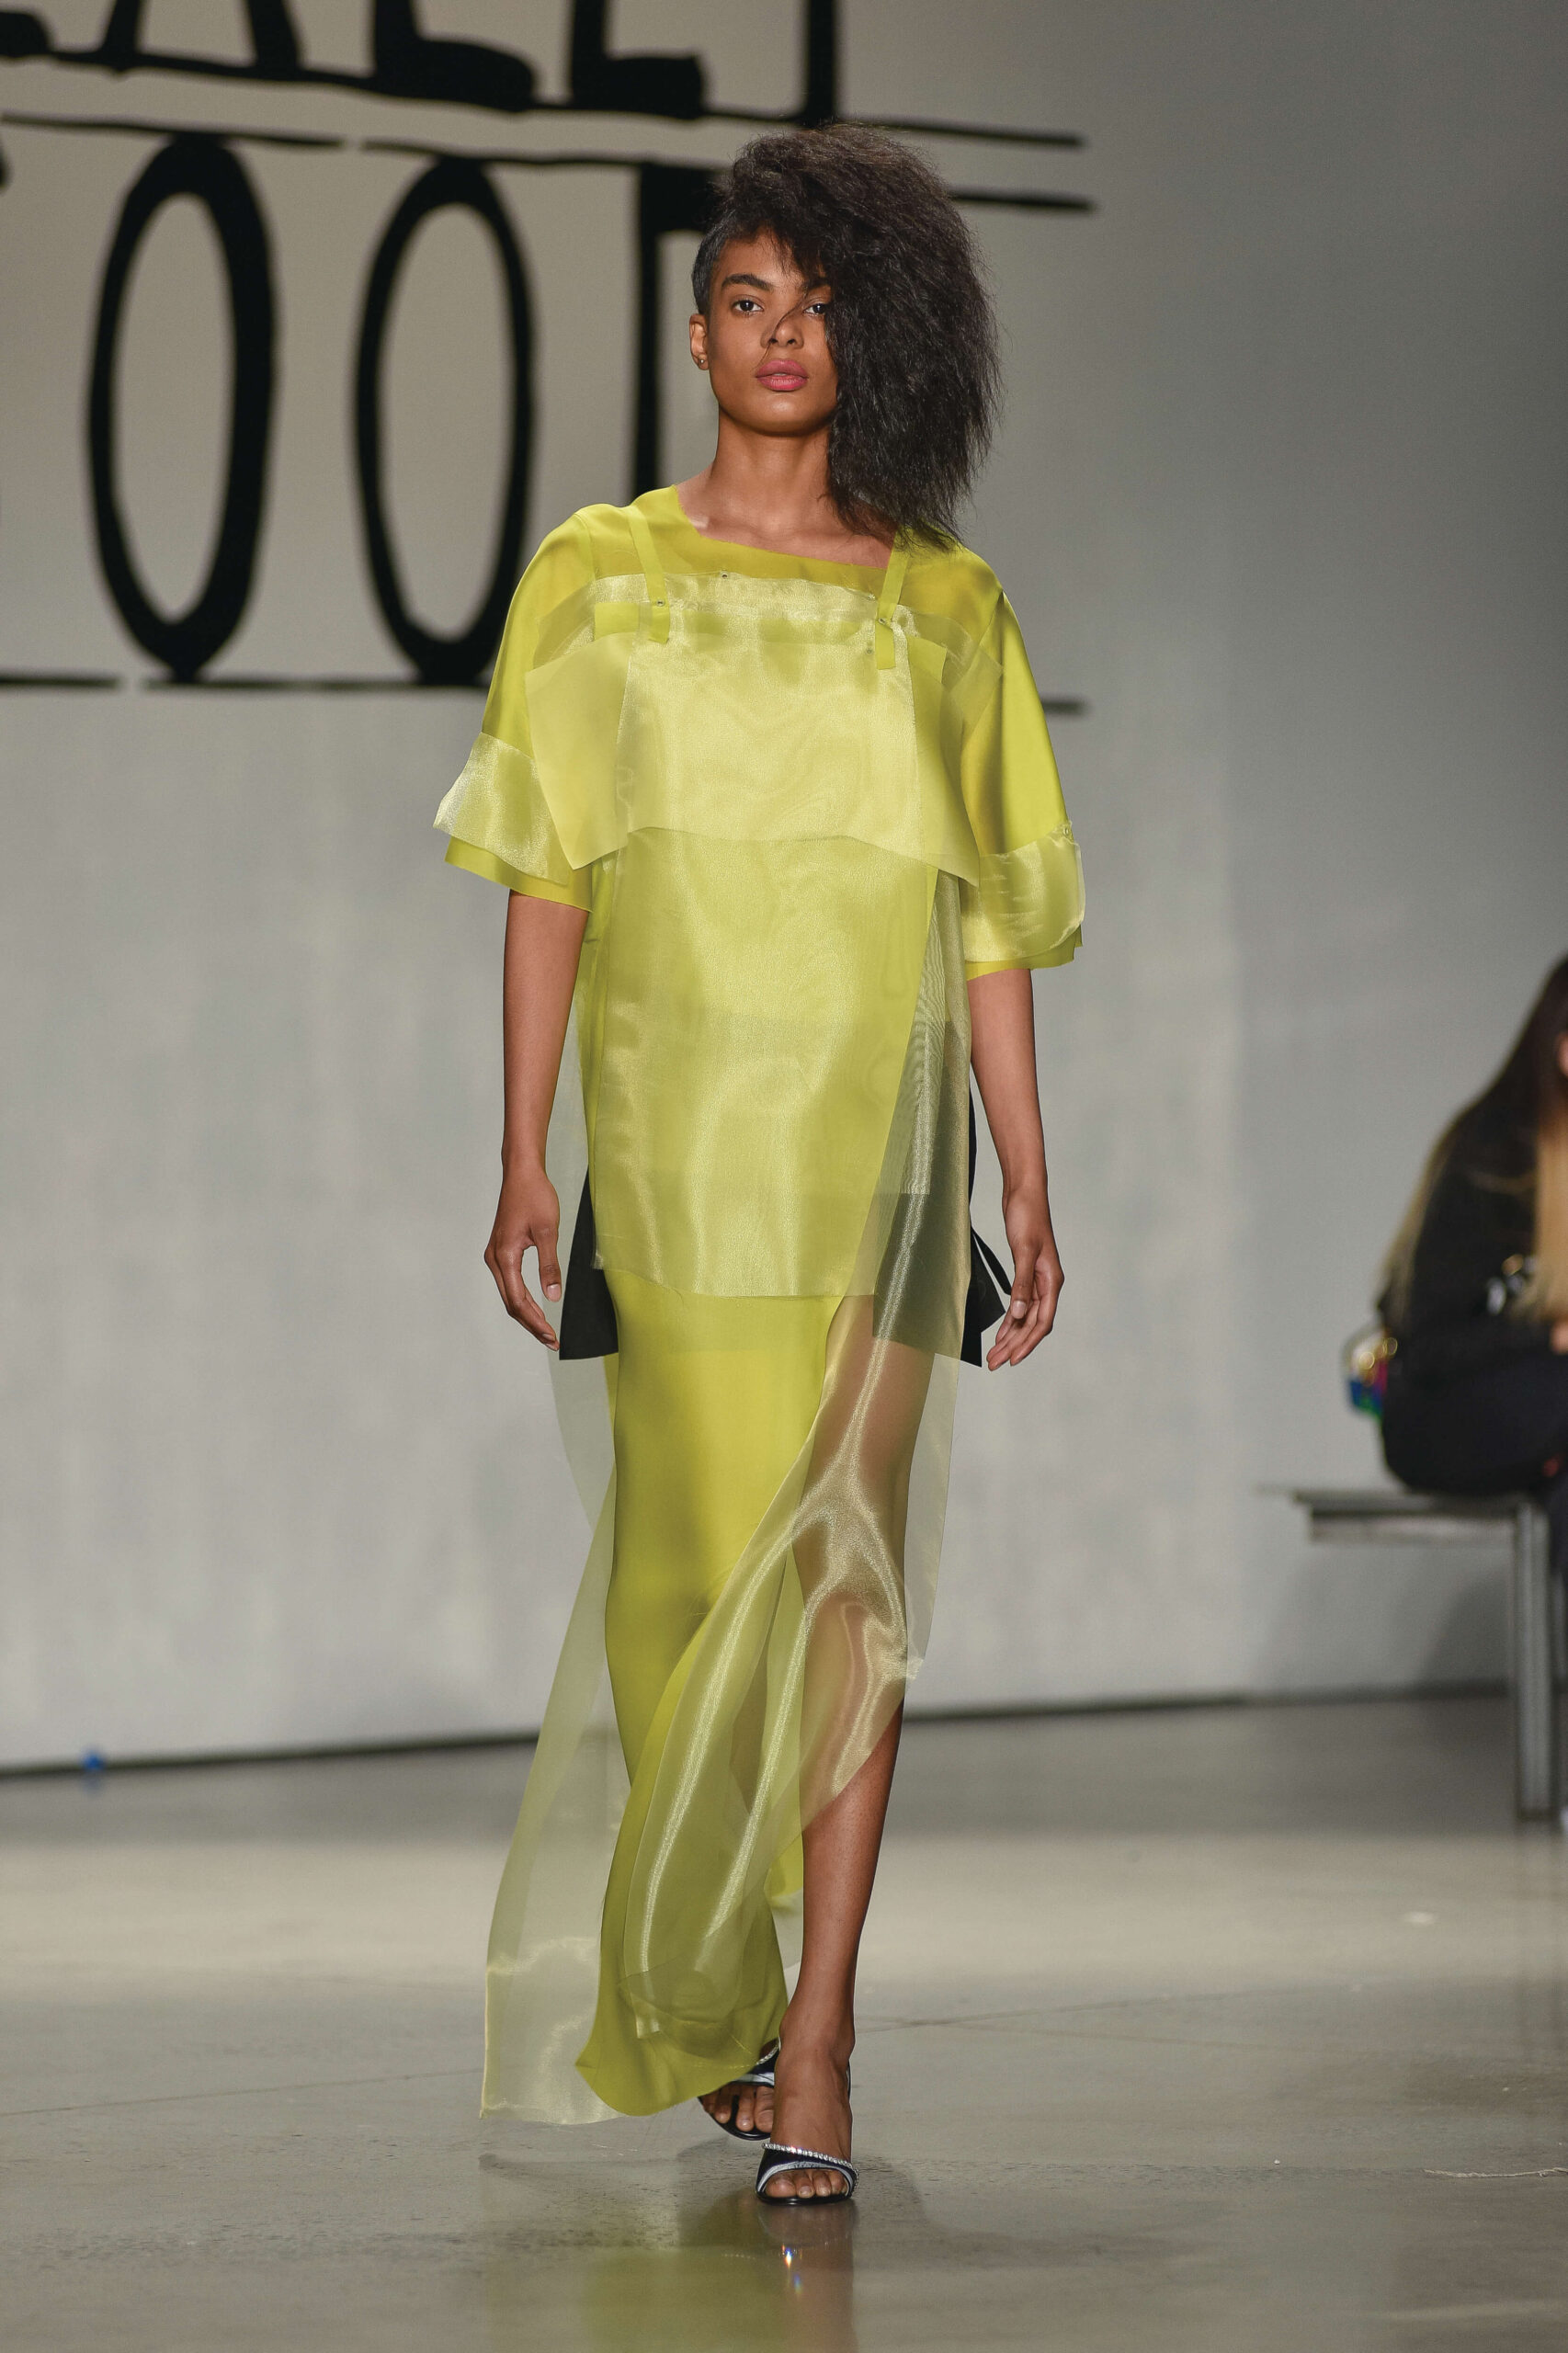 A model walks along a catwalk wearing a long, yellow dress. The bottom of the dress is somewhat translucent.